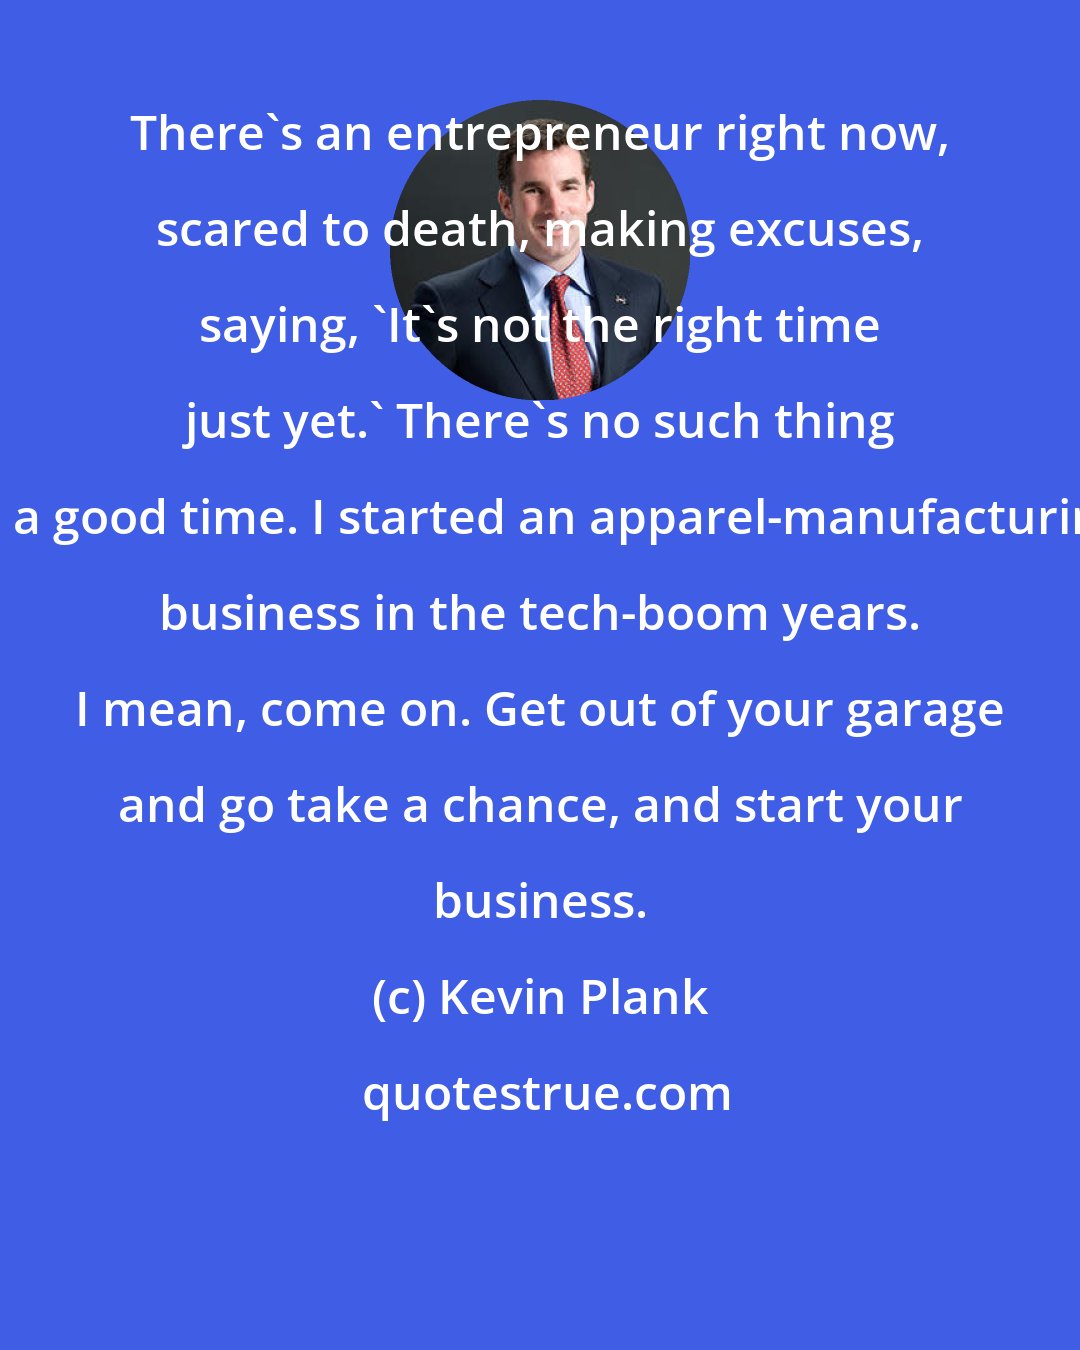 Kevin Plank: There's an entrepreneur right now, scared to death, making excuses, saying, 'It's not the right time just yet.' There's no such thing as a good time. I started an apparel-manufacturing business in the tech-boom years. I mean, come on. Get out of your garage and go take a chance, and start your business.